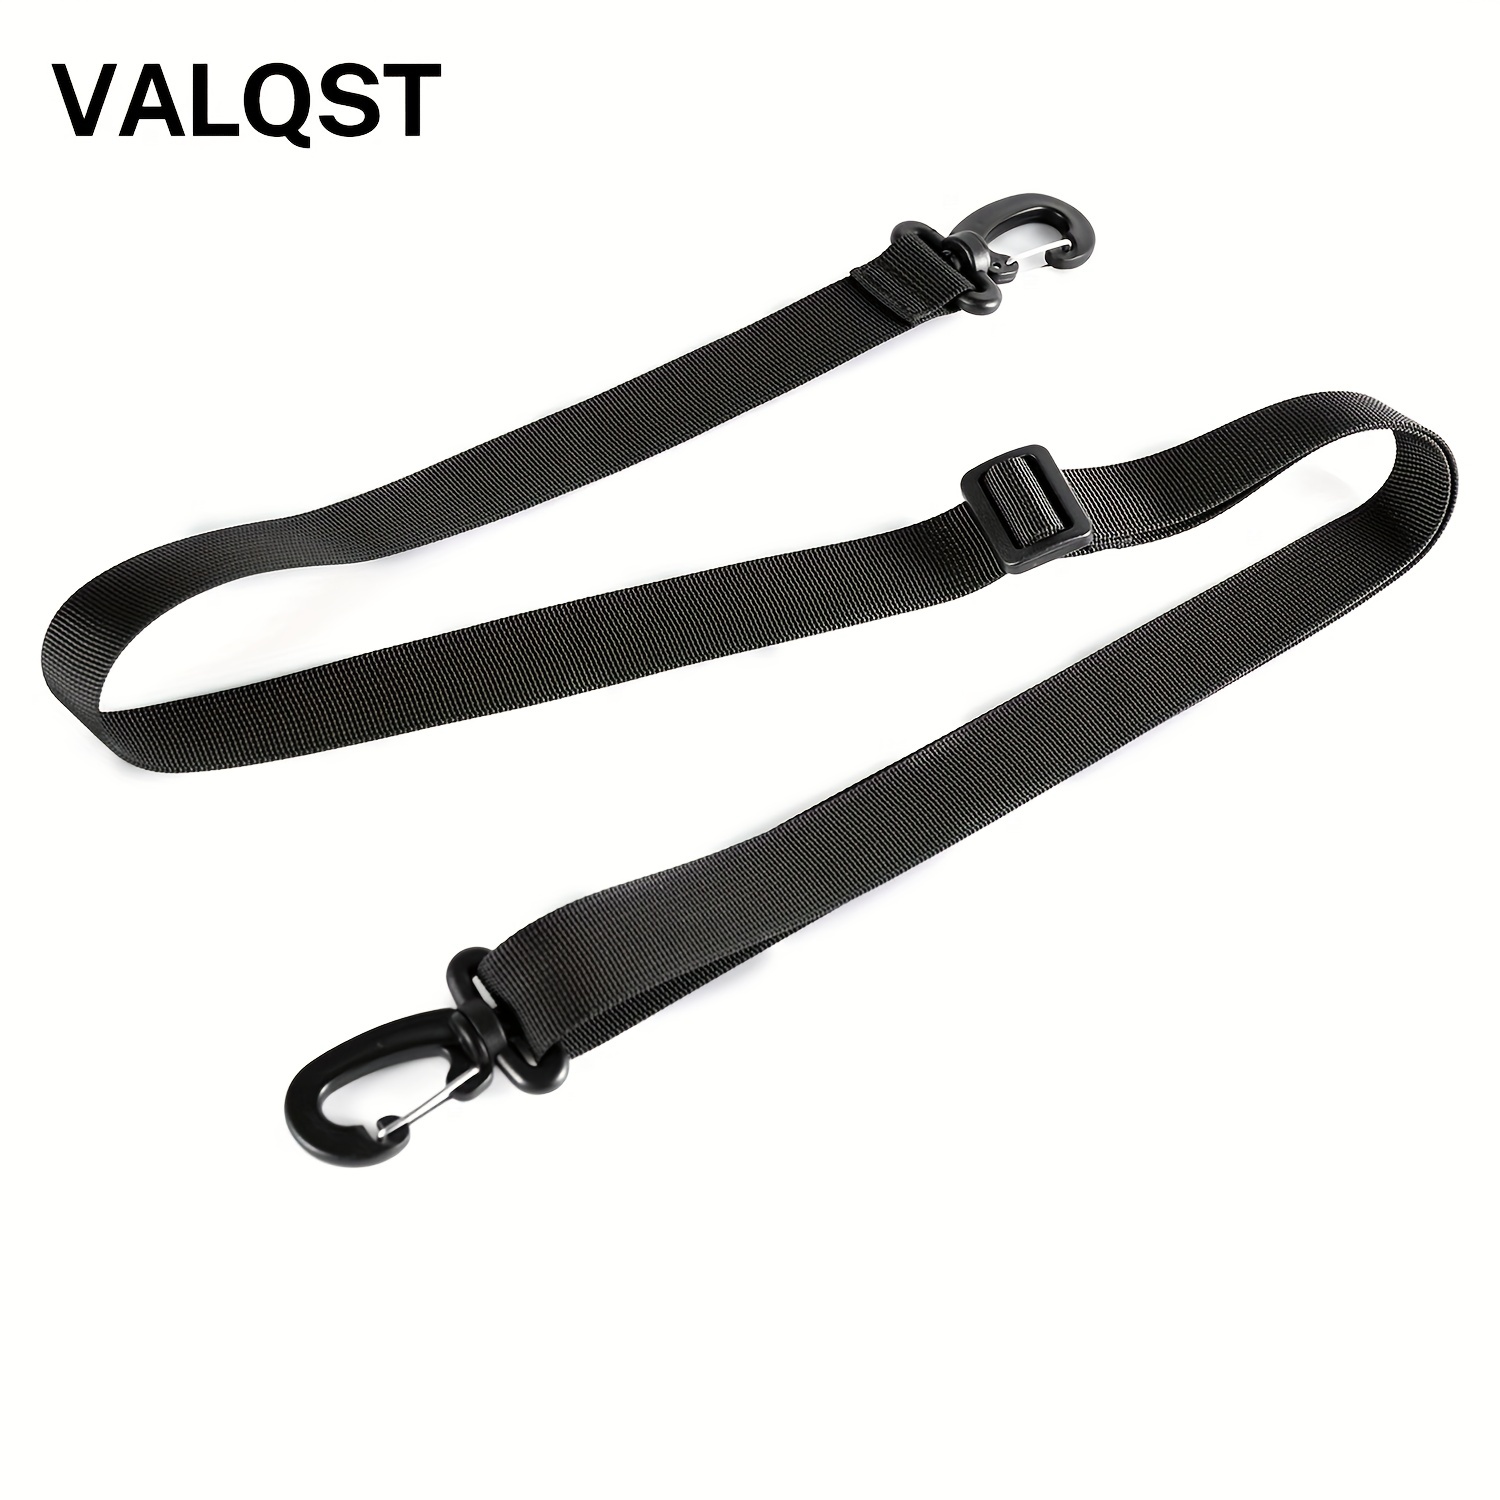 Valqst Adjustable Shoulder Straps - Perfect Replacement Crossbody